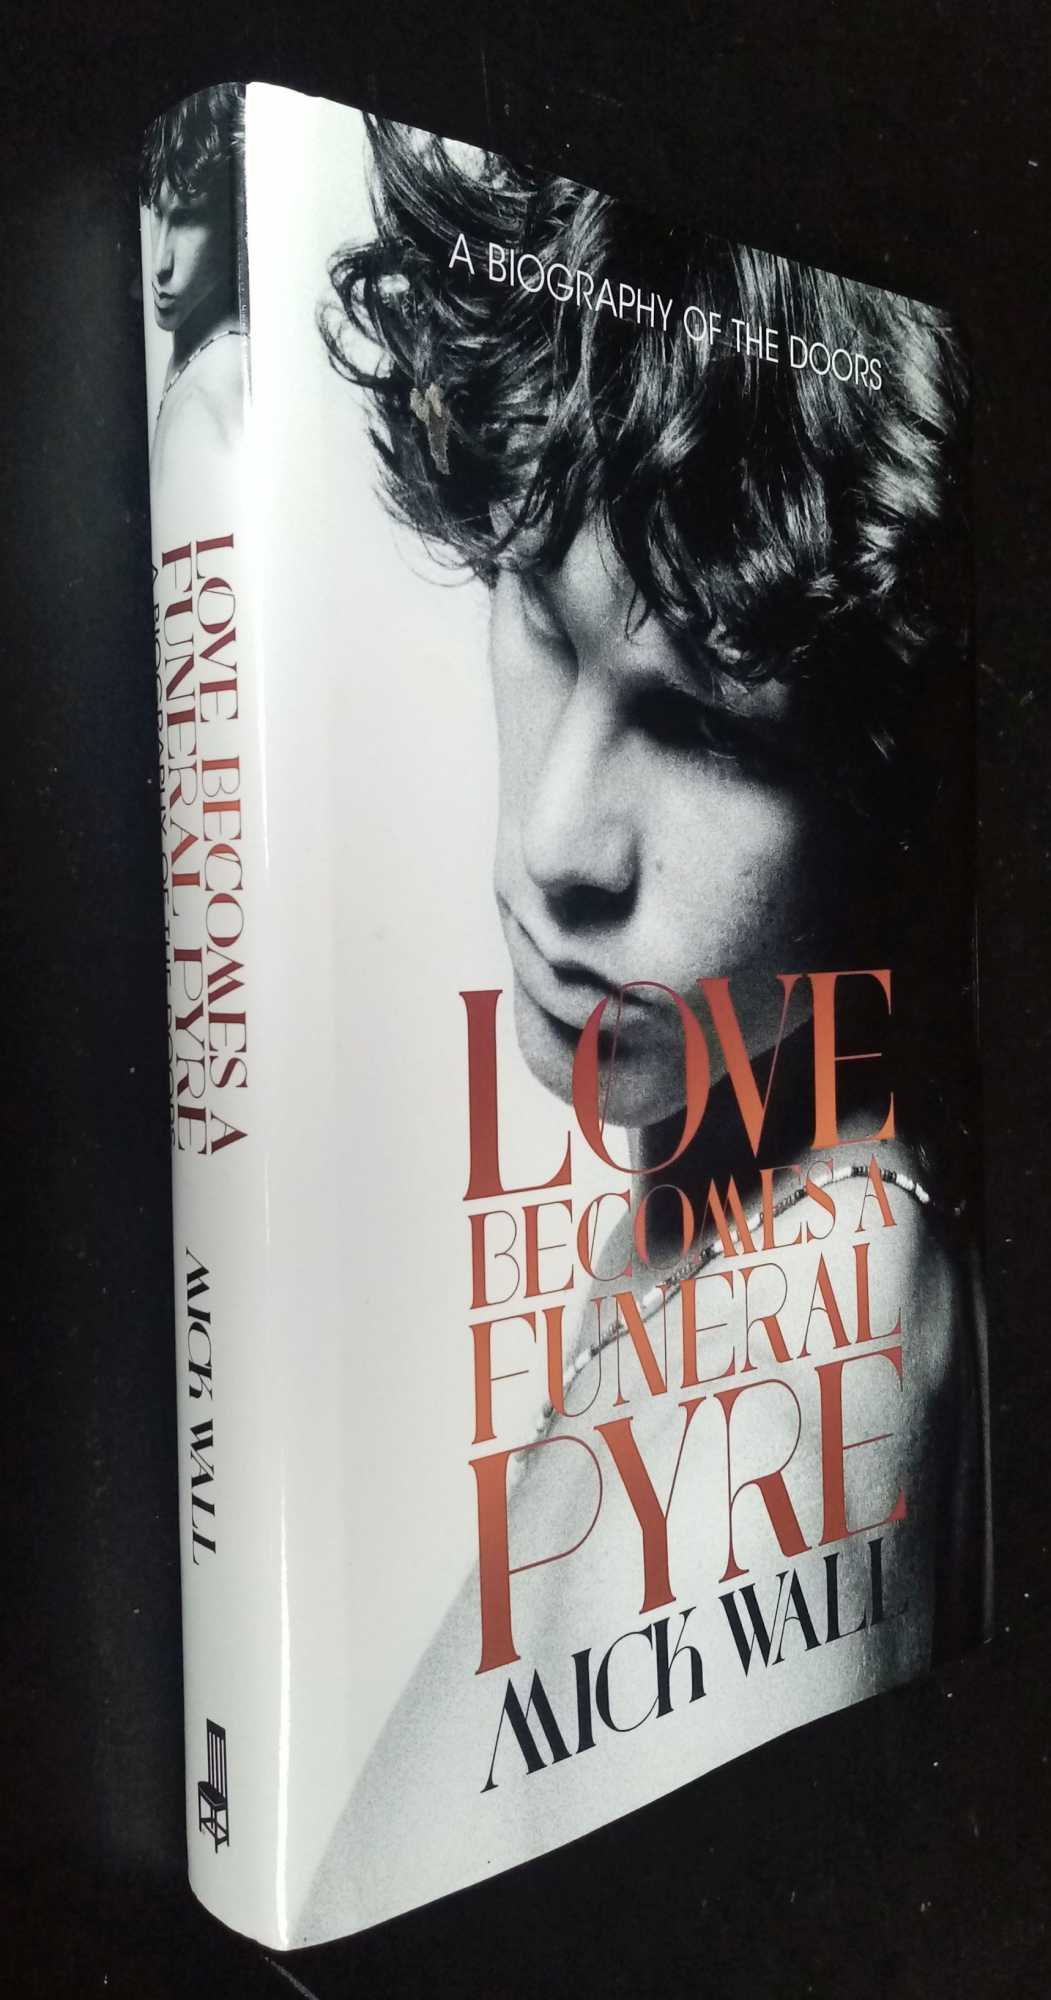 Mick Wall - Love Becomes a Funeral Pyre: A Biography of the Doors